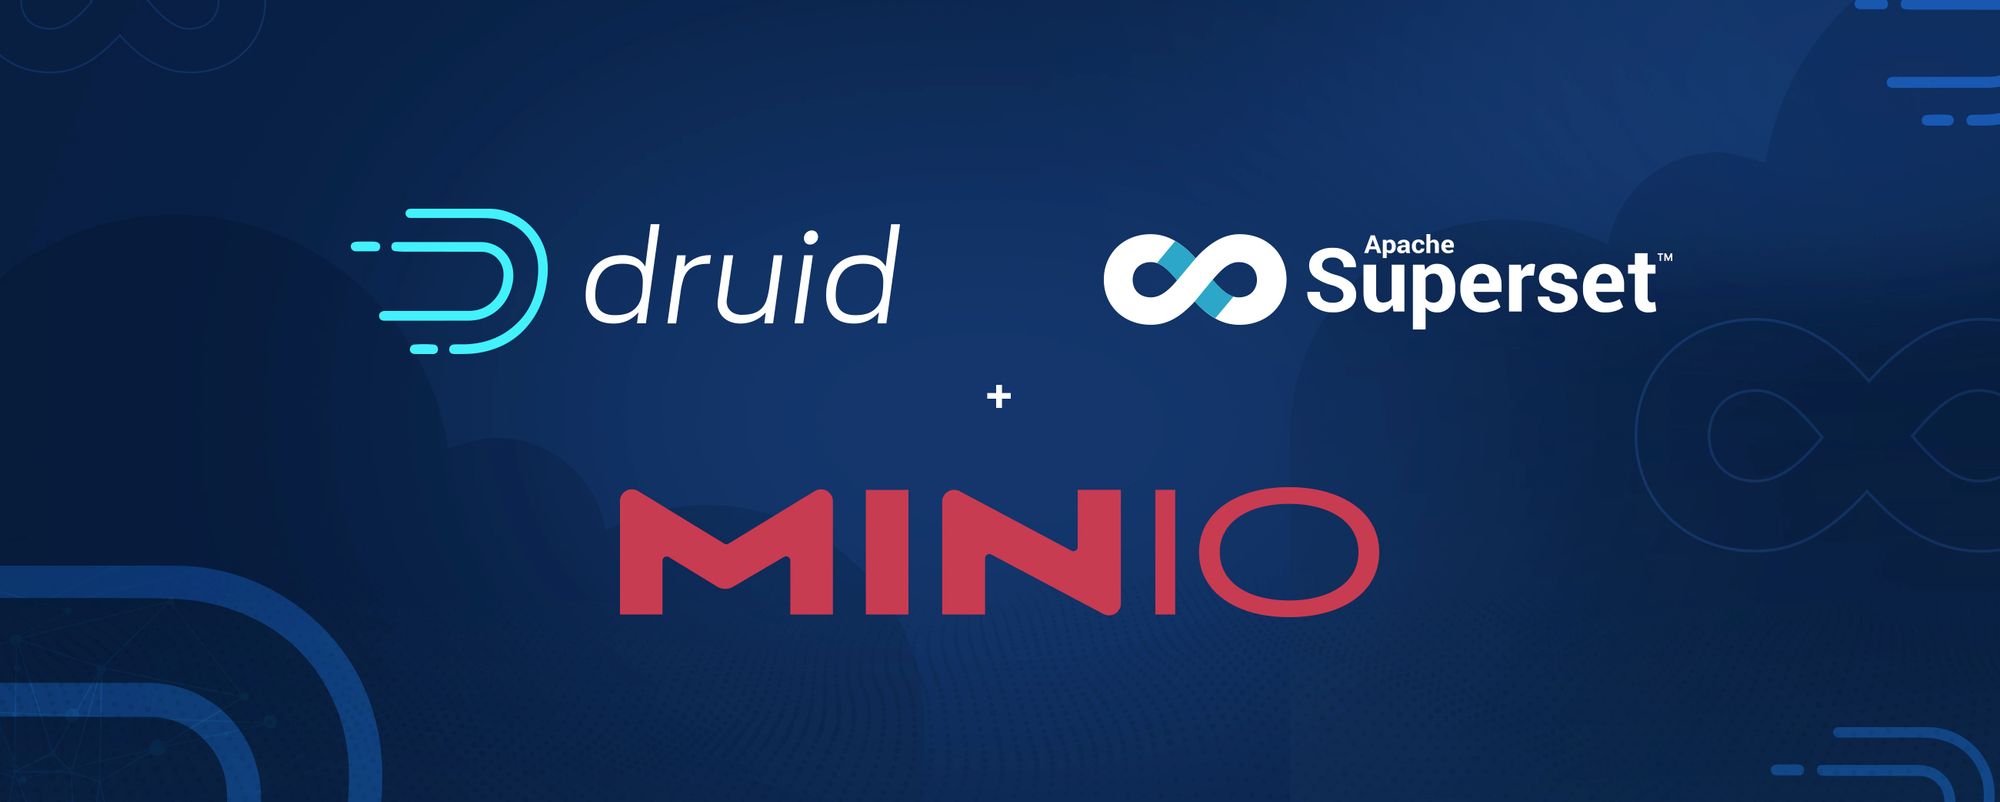 How to Run Apache Druid and Apache Superset with MinIO